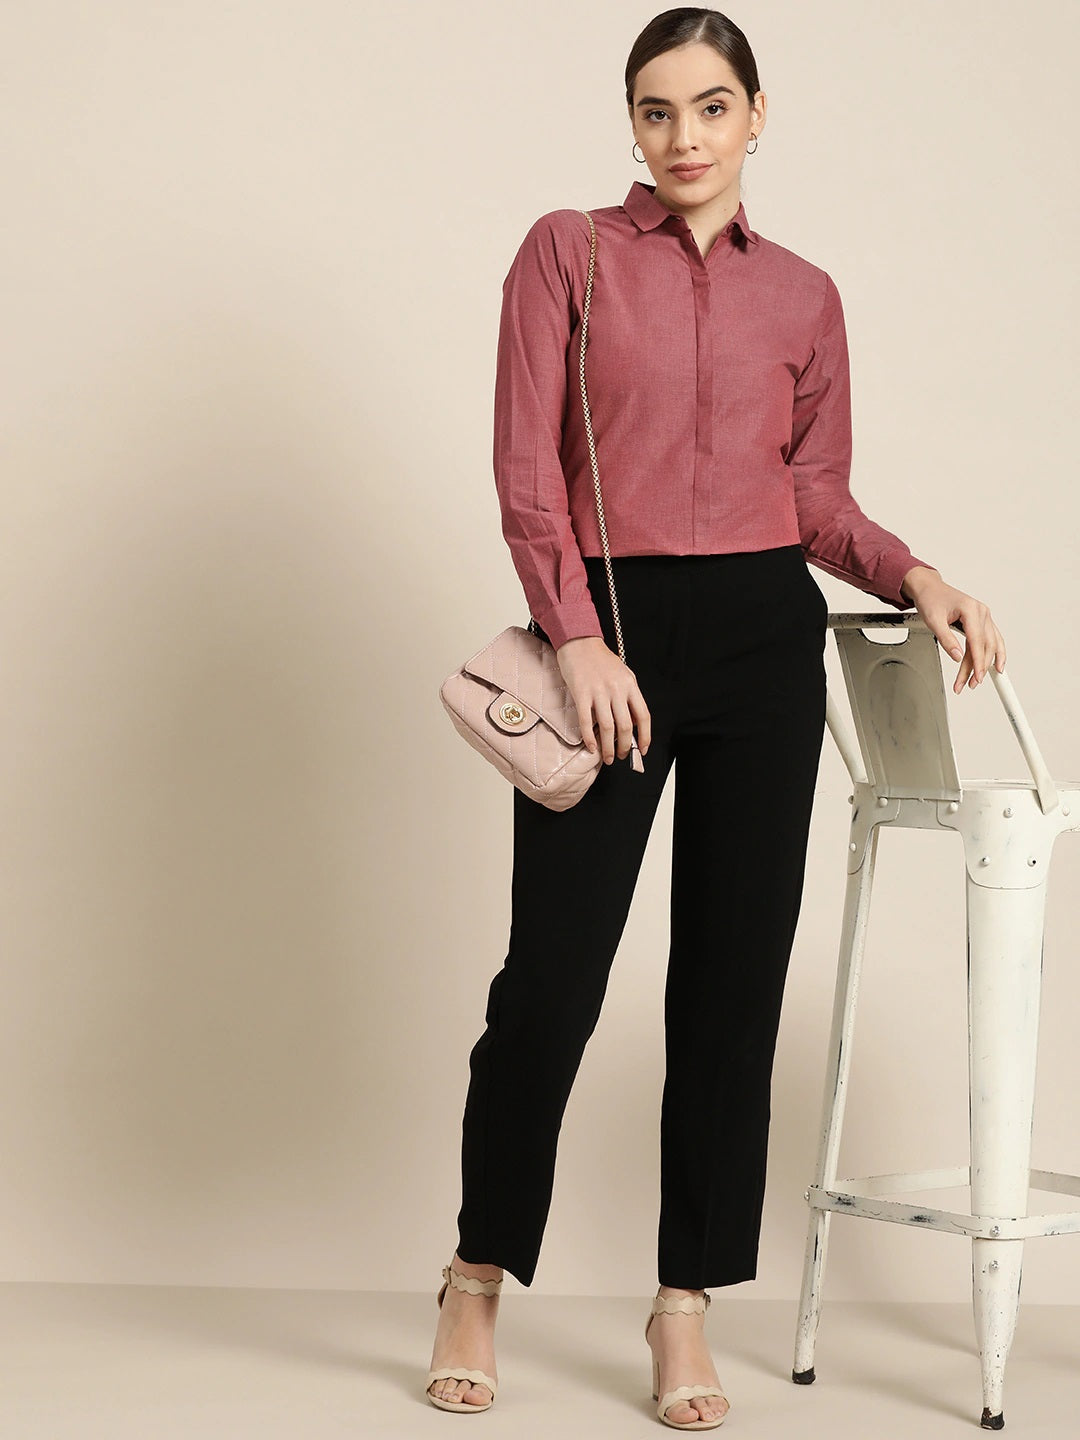 Women Maroon Solid Pure Cotton Slim Fit Formal Shirt